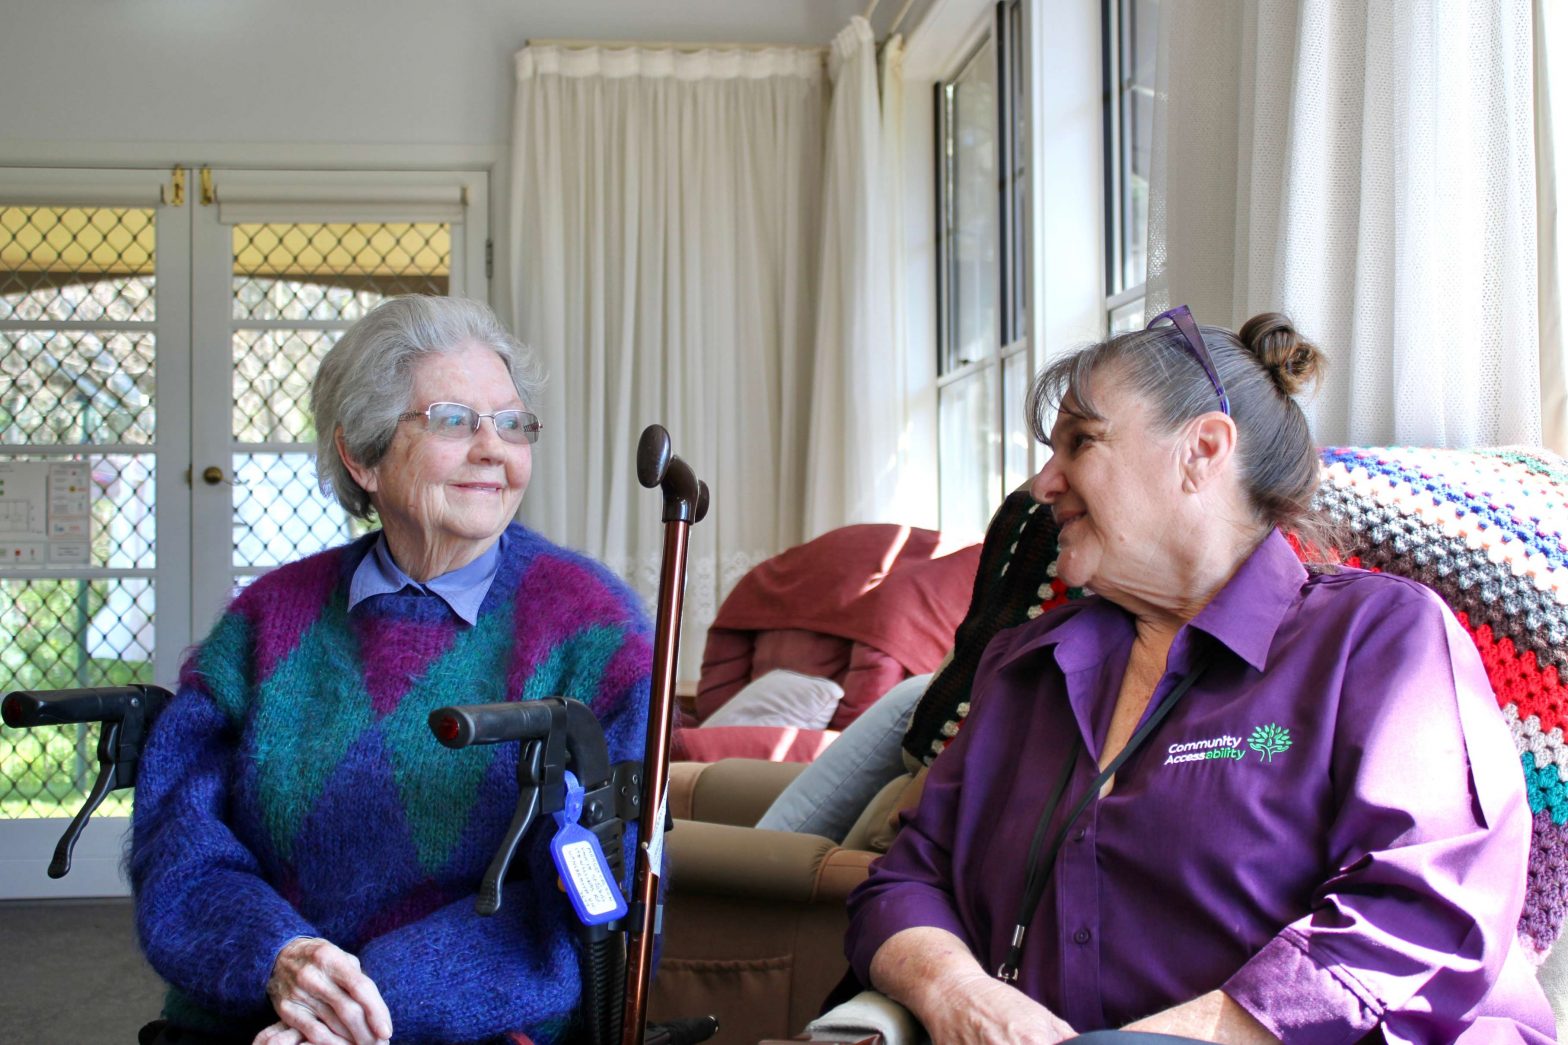 Aged person and support worker talking in lounge room